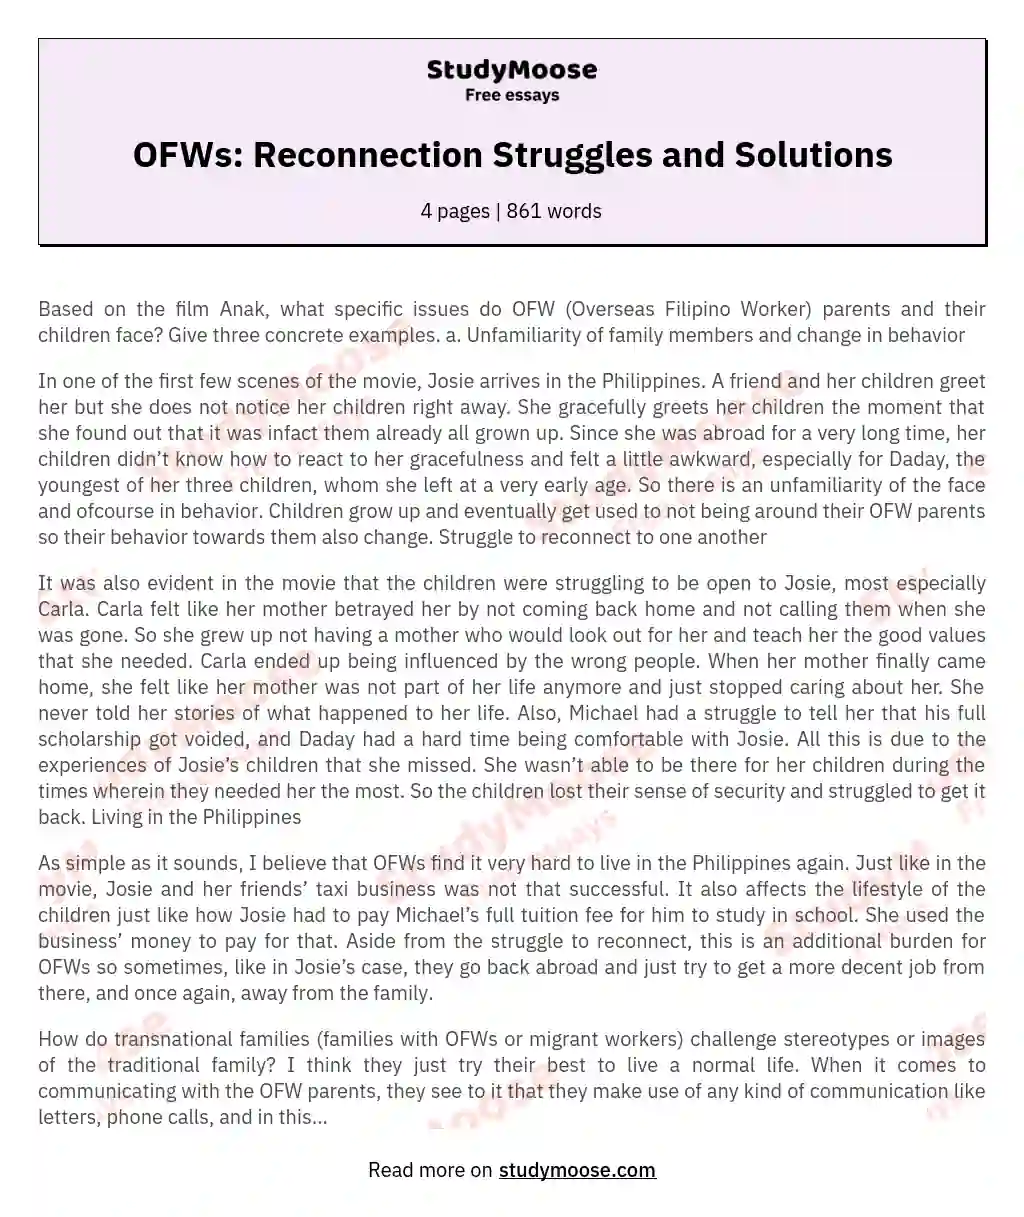 OFWs: Reconnection Struggles and Solutions essay